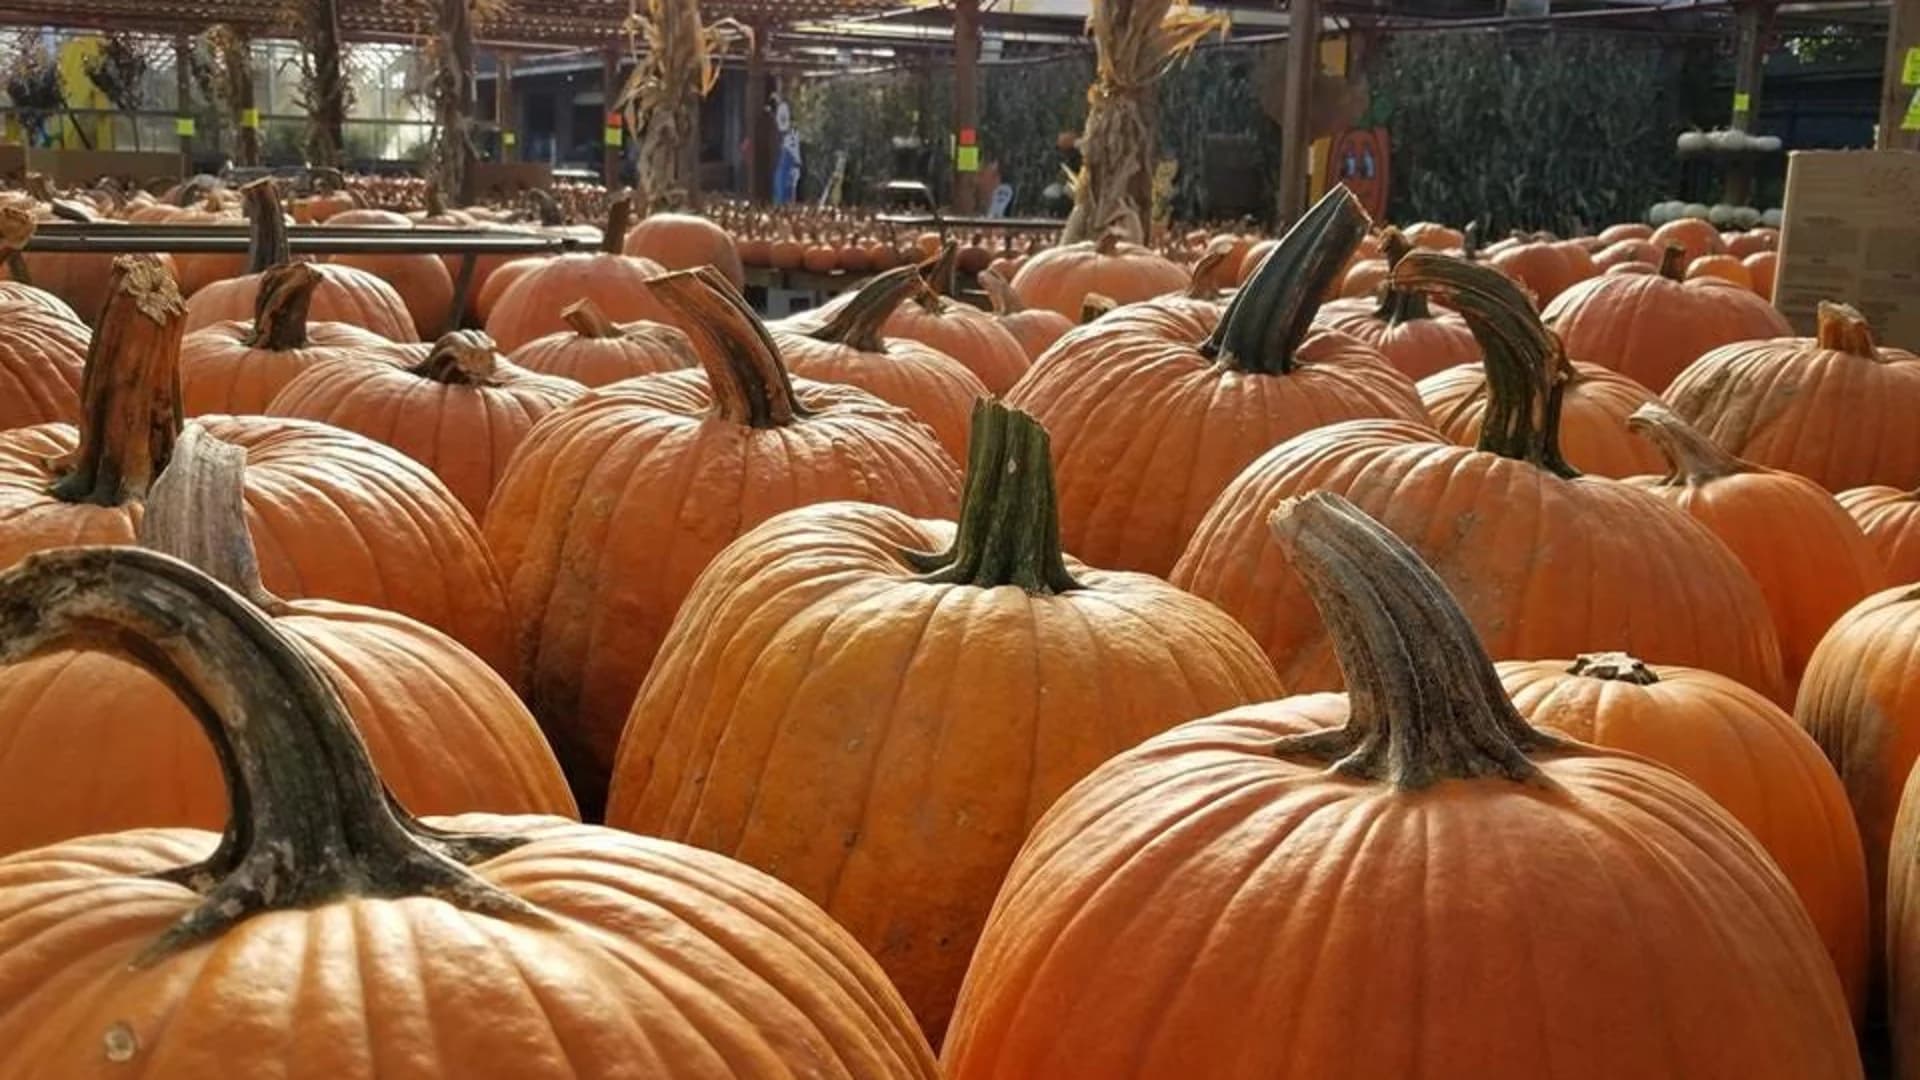 Guide: Where to go pumpkin picking on Long Island